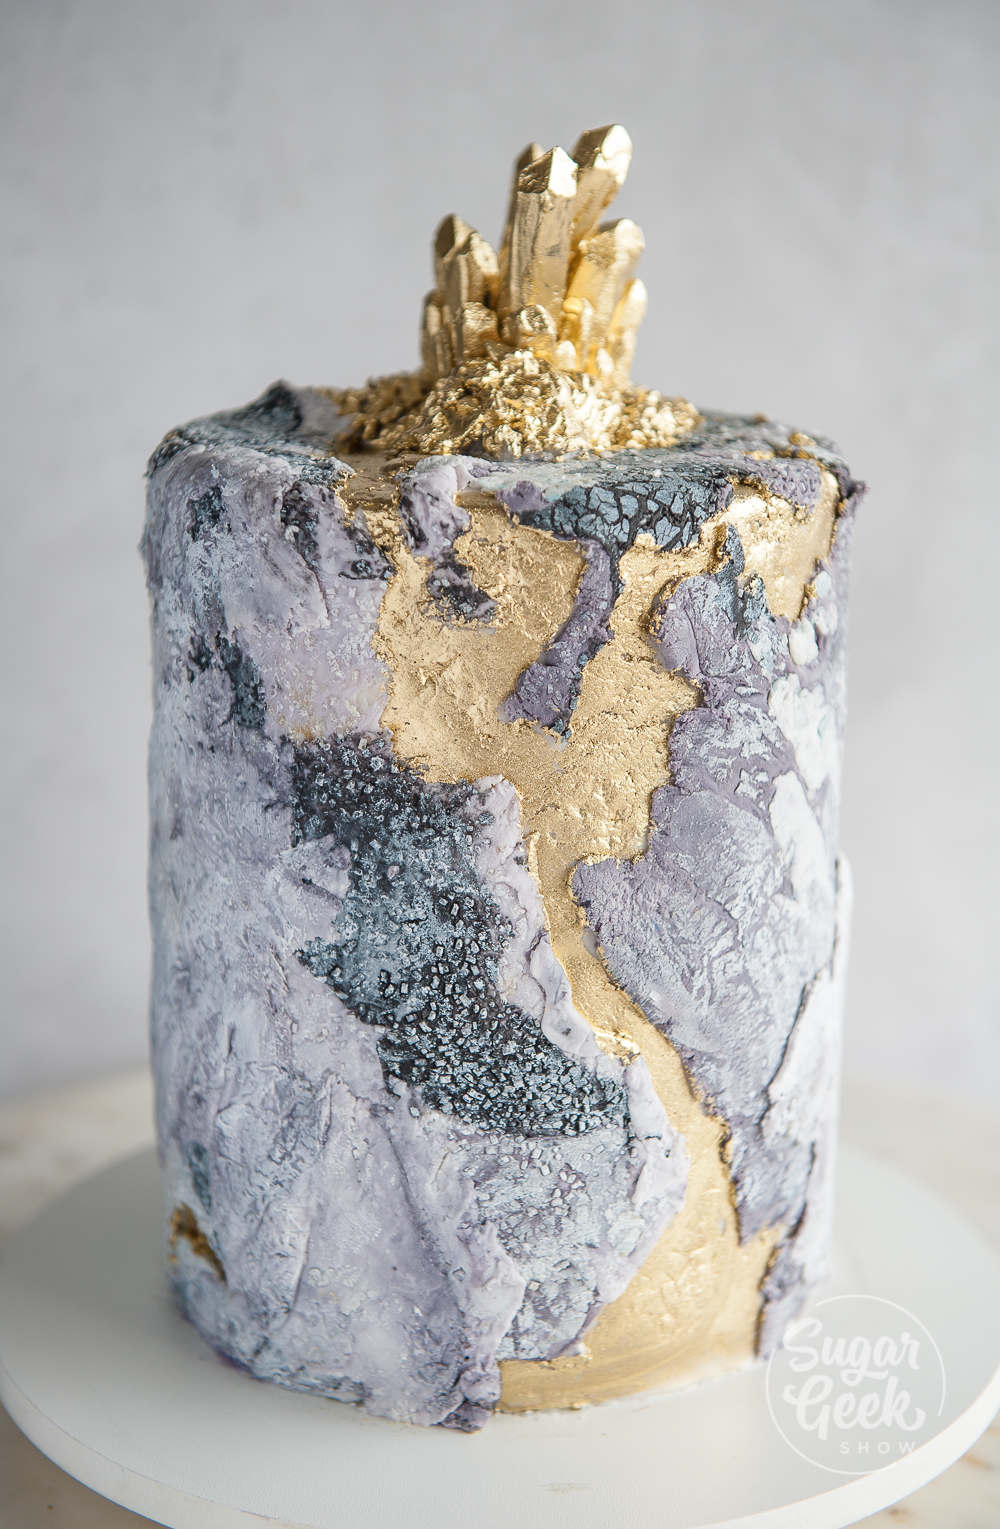 gold painted on buttercream in between fondant pieces on a stone texture cake